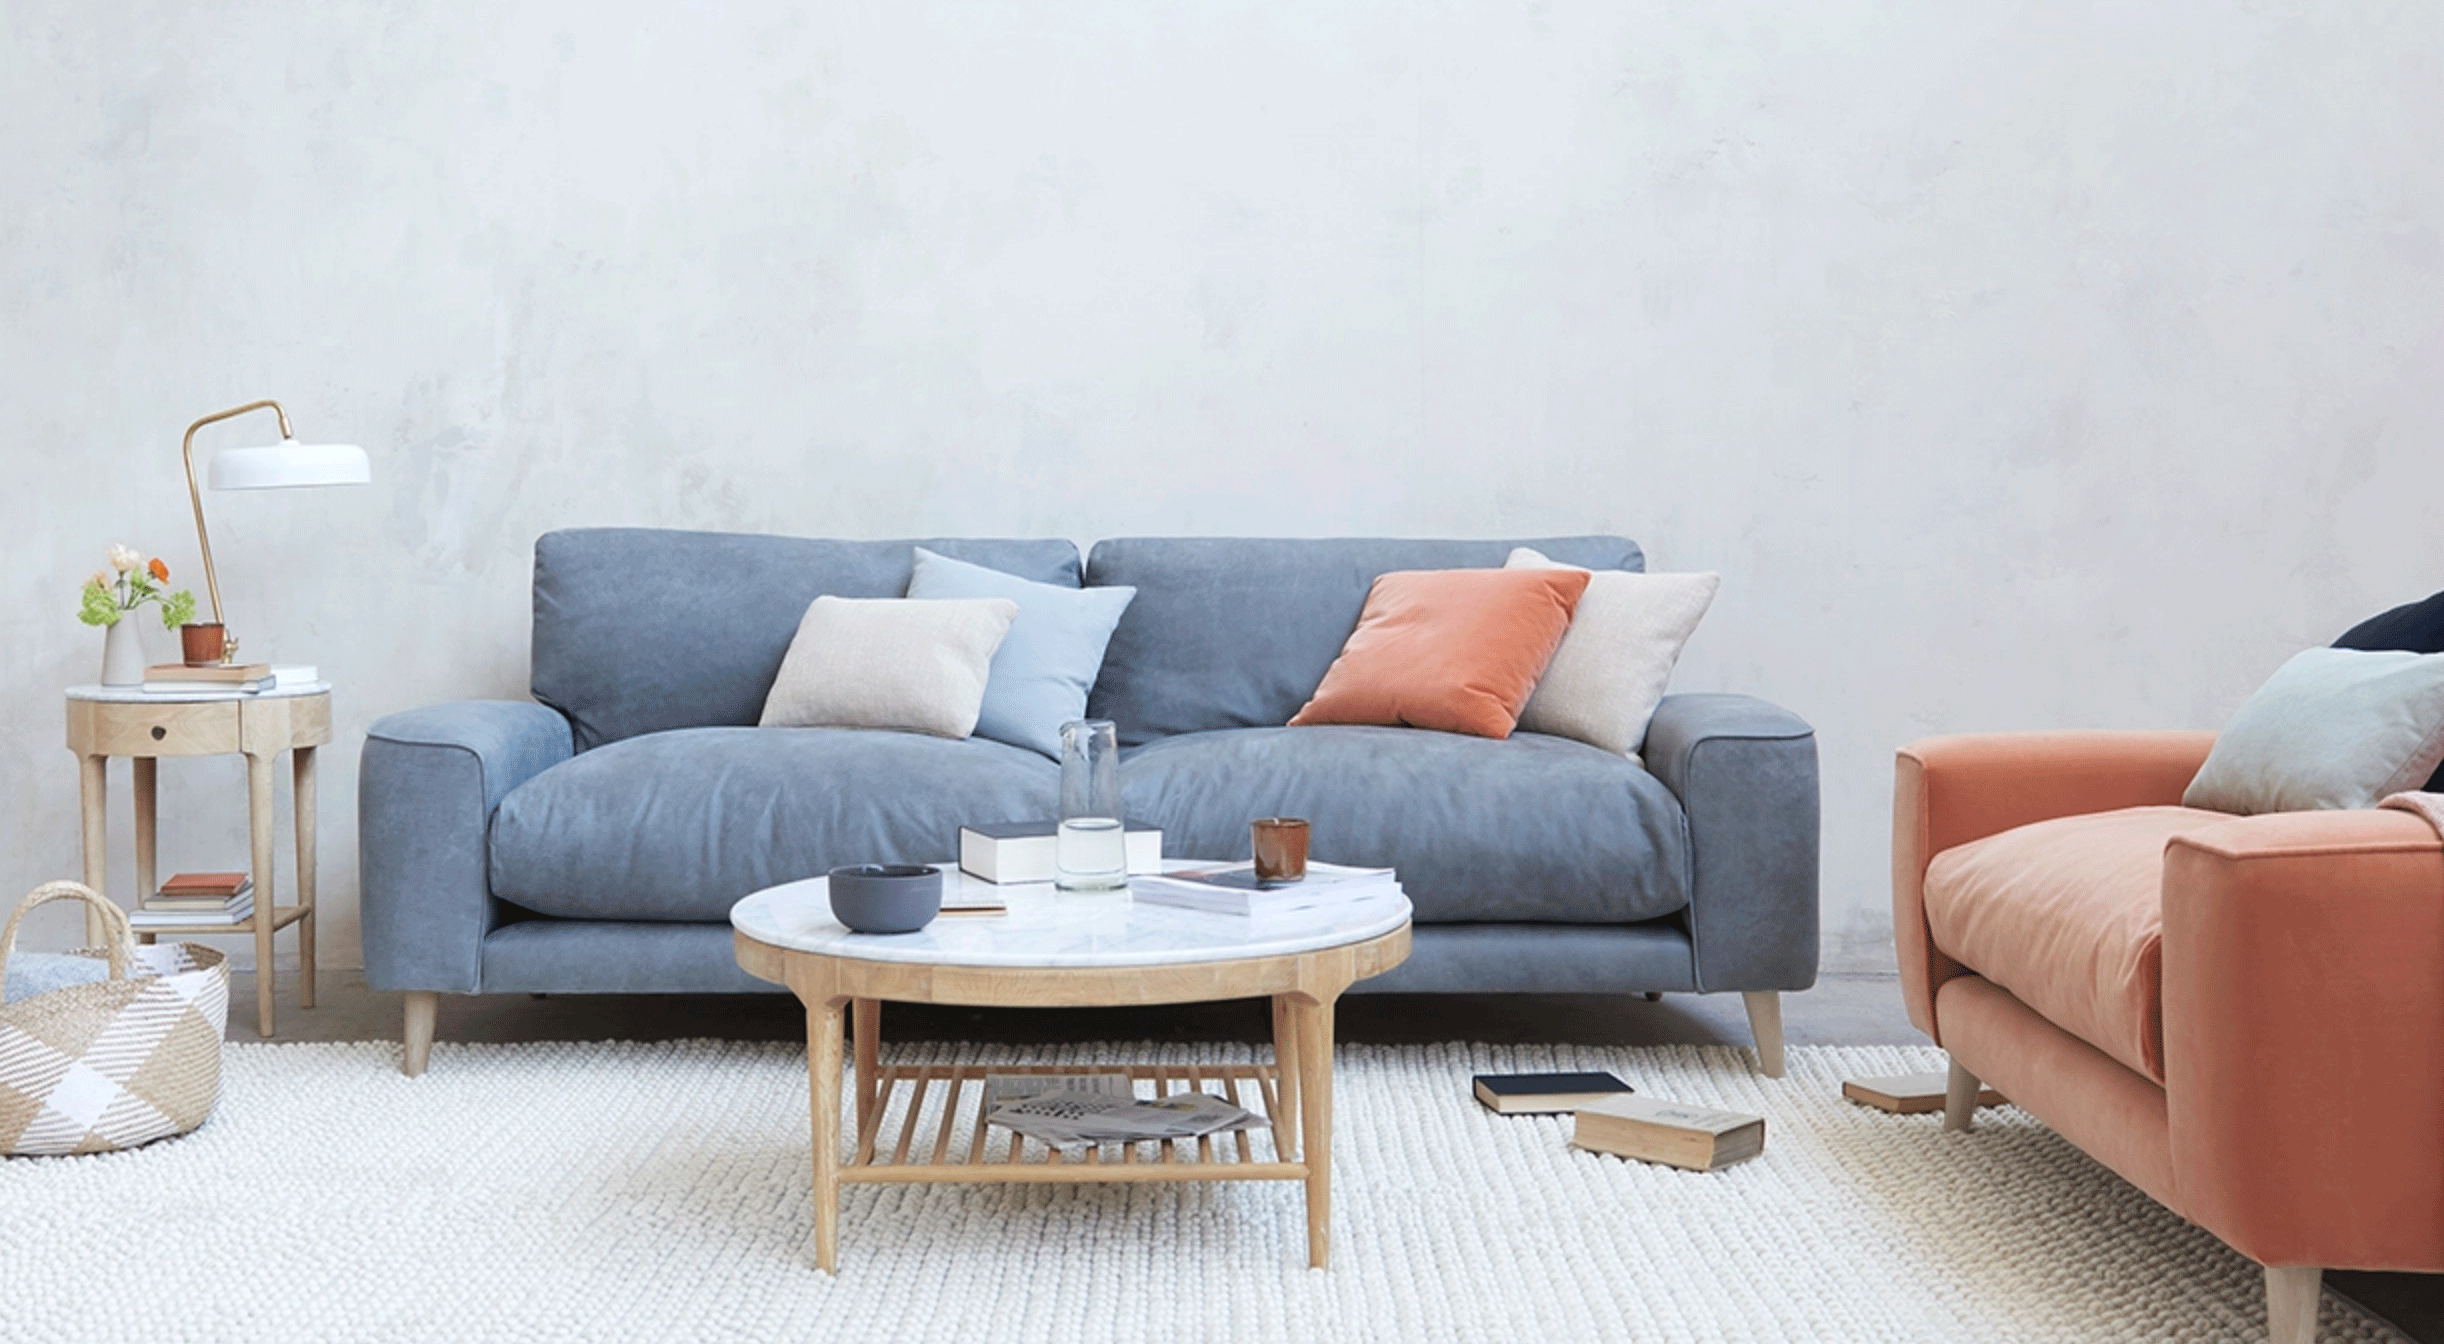 una taza de golpear Ingenieria The best sofa brands: 12 top places to shop for a new sofa | Real Homes